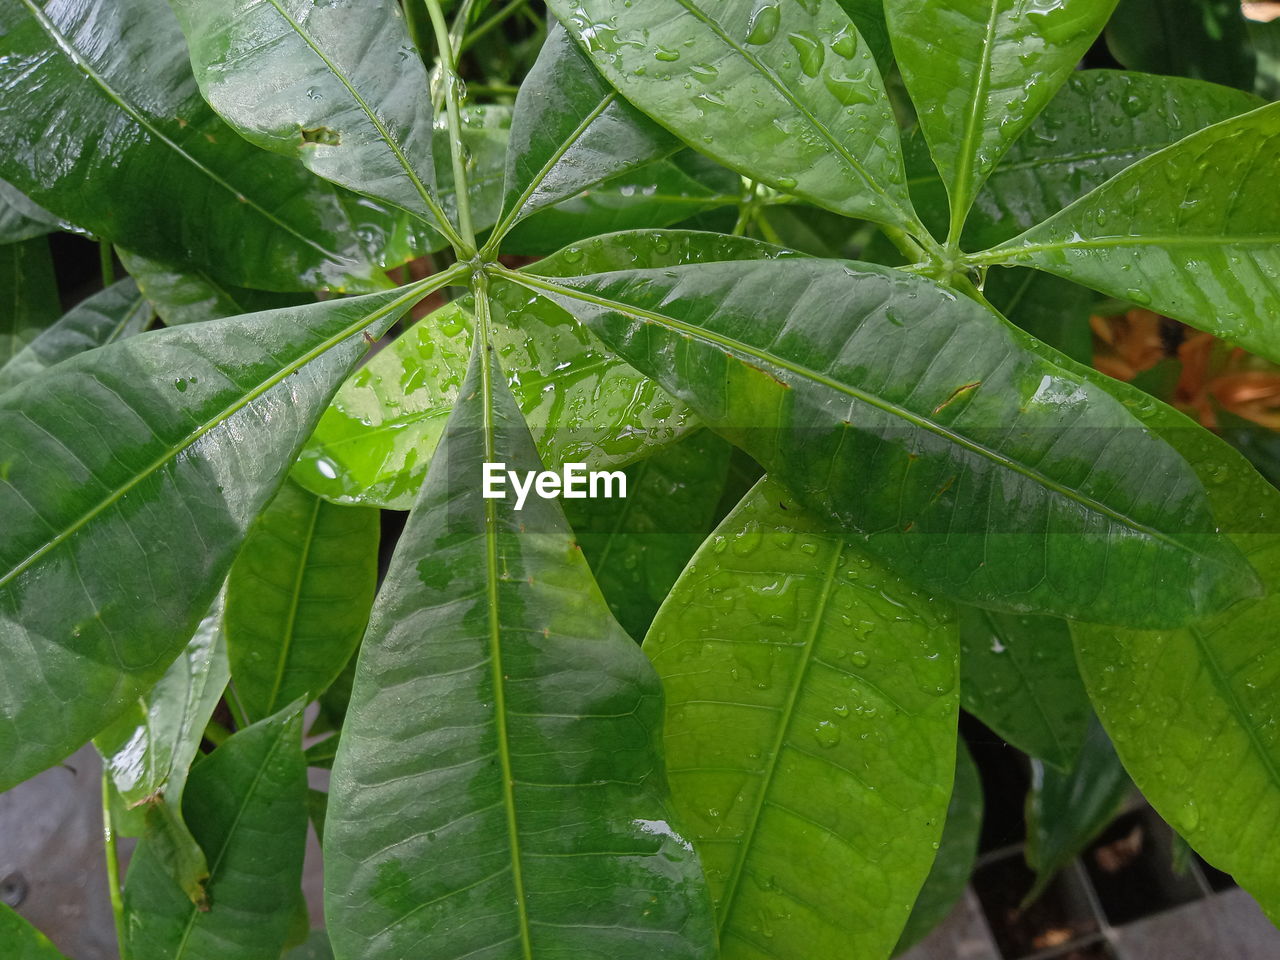 CLOSE-UP OF WET PLANT LEAVES DURING RAINY SEASON